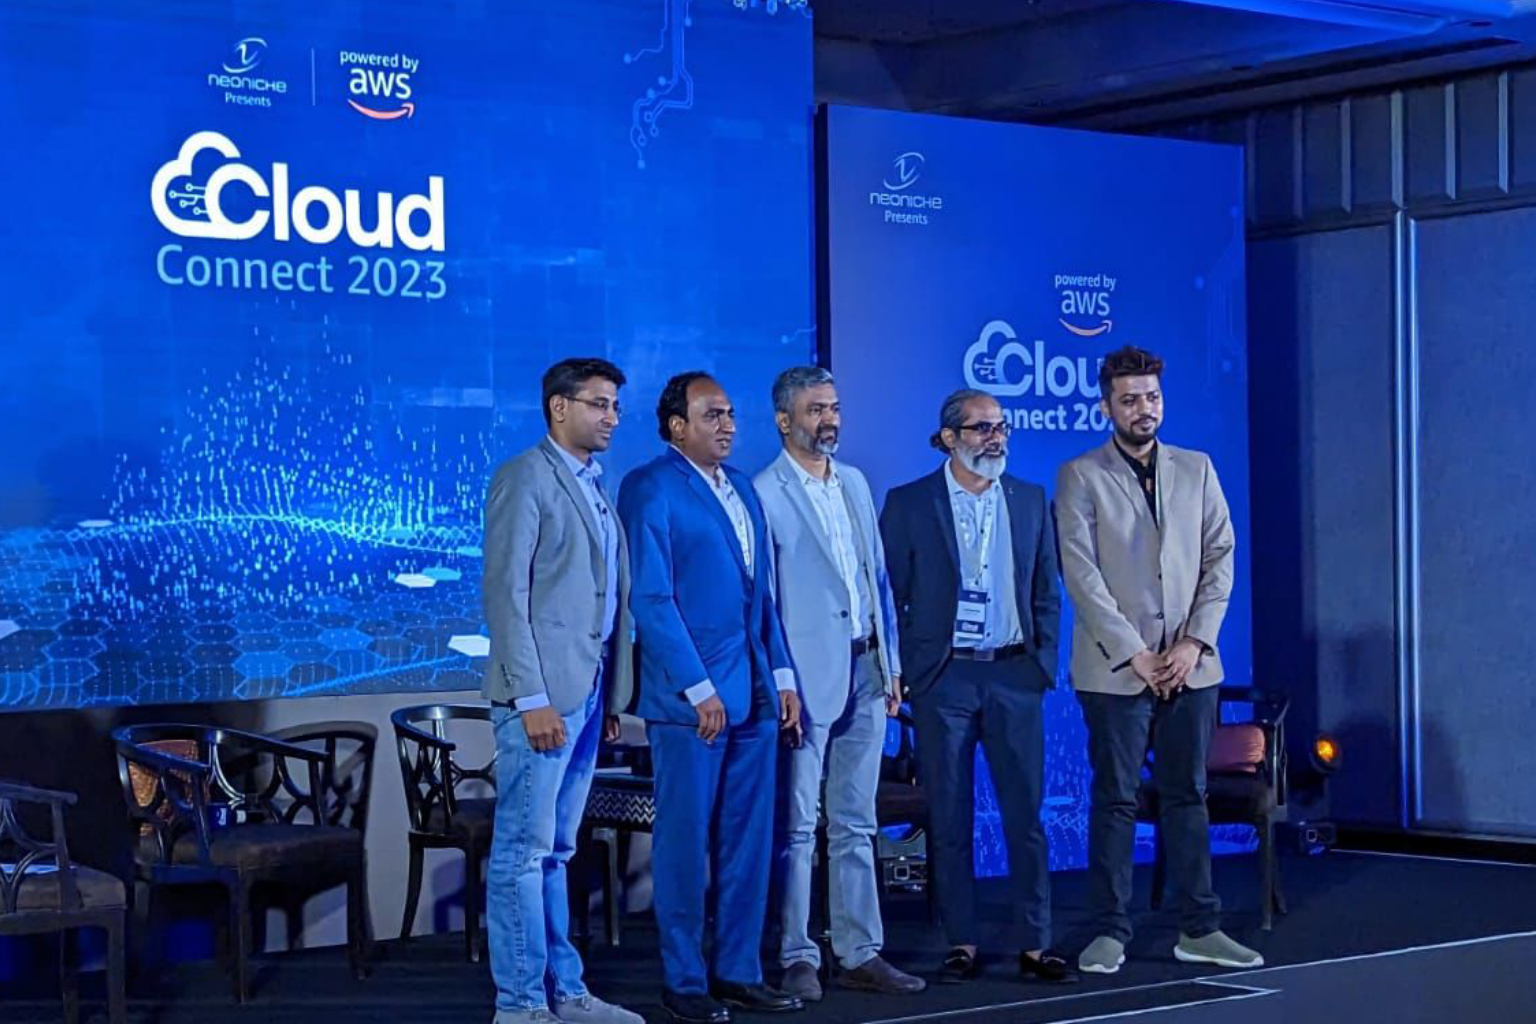 Indium at the annual AWS Cloud Connect 2023